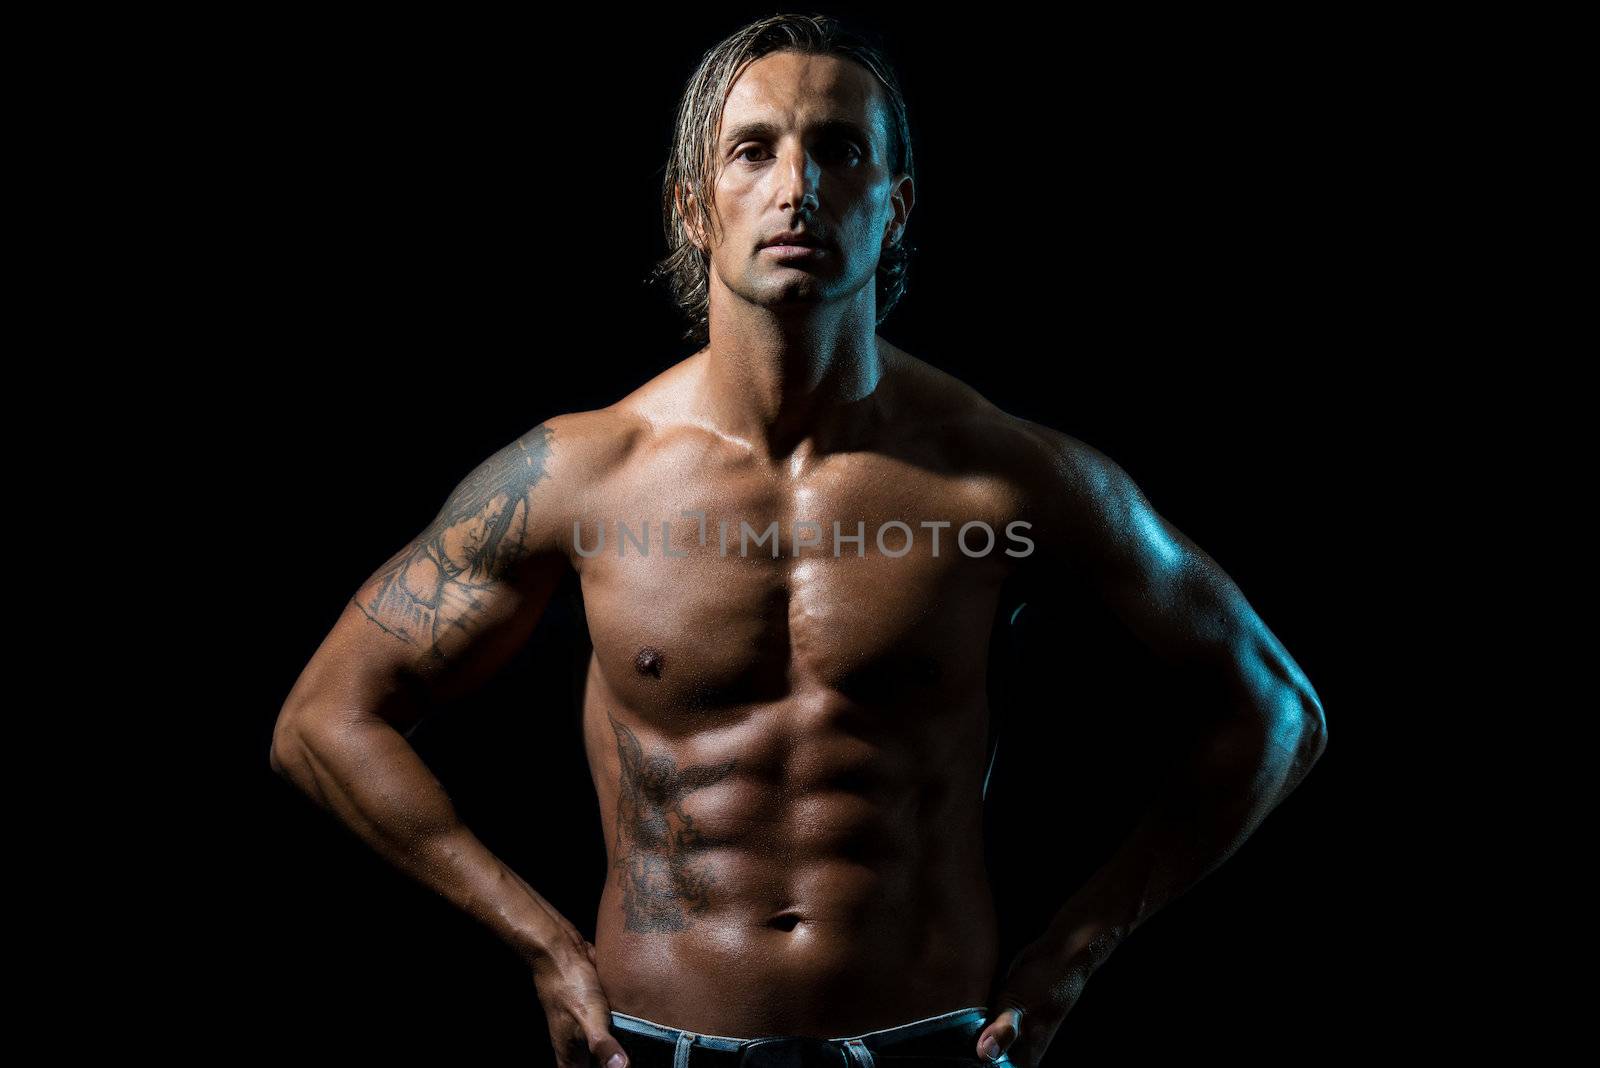 Muscular male by JalePhoto